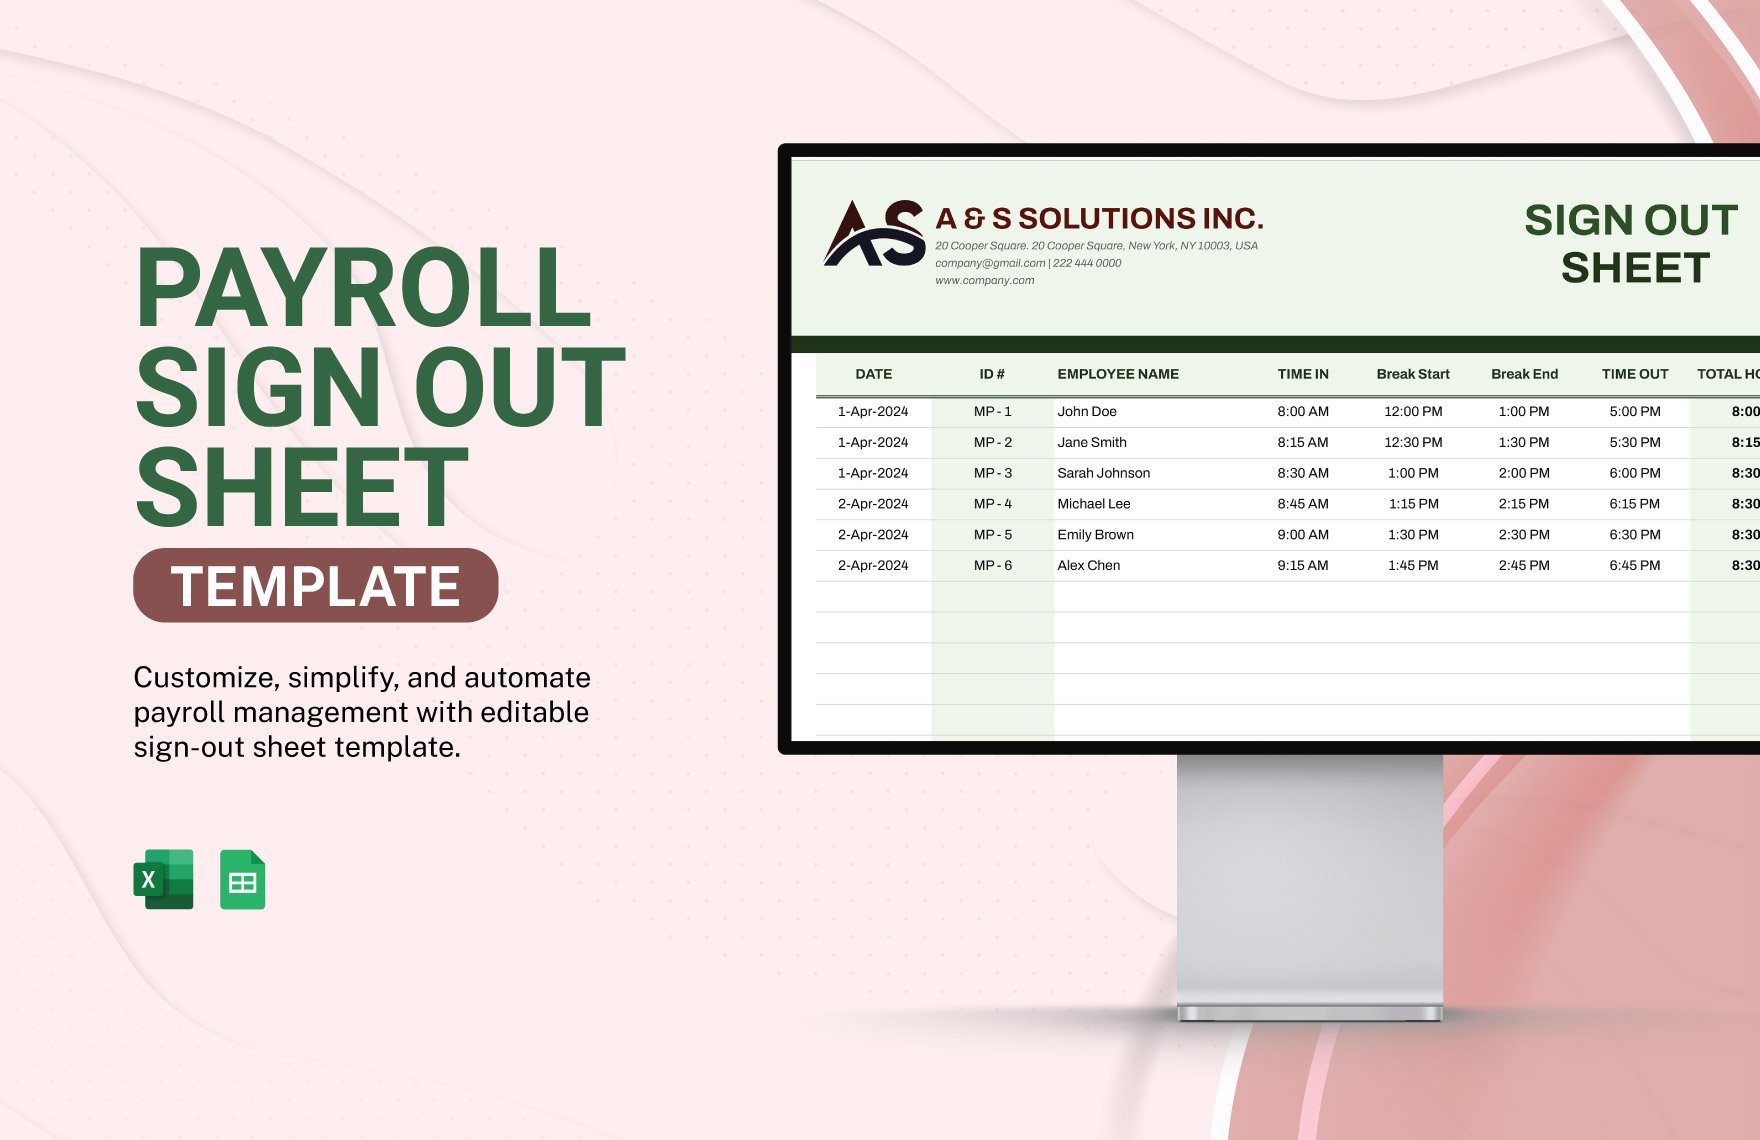 Payroll Sign Out Sheet Template